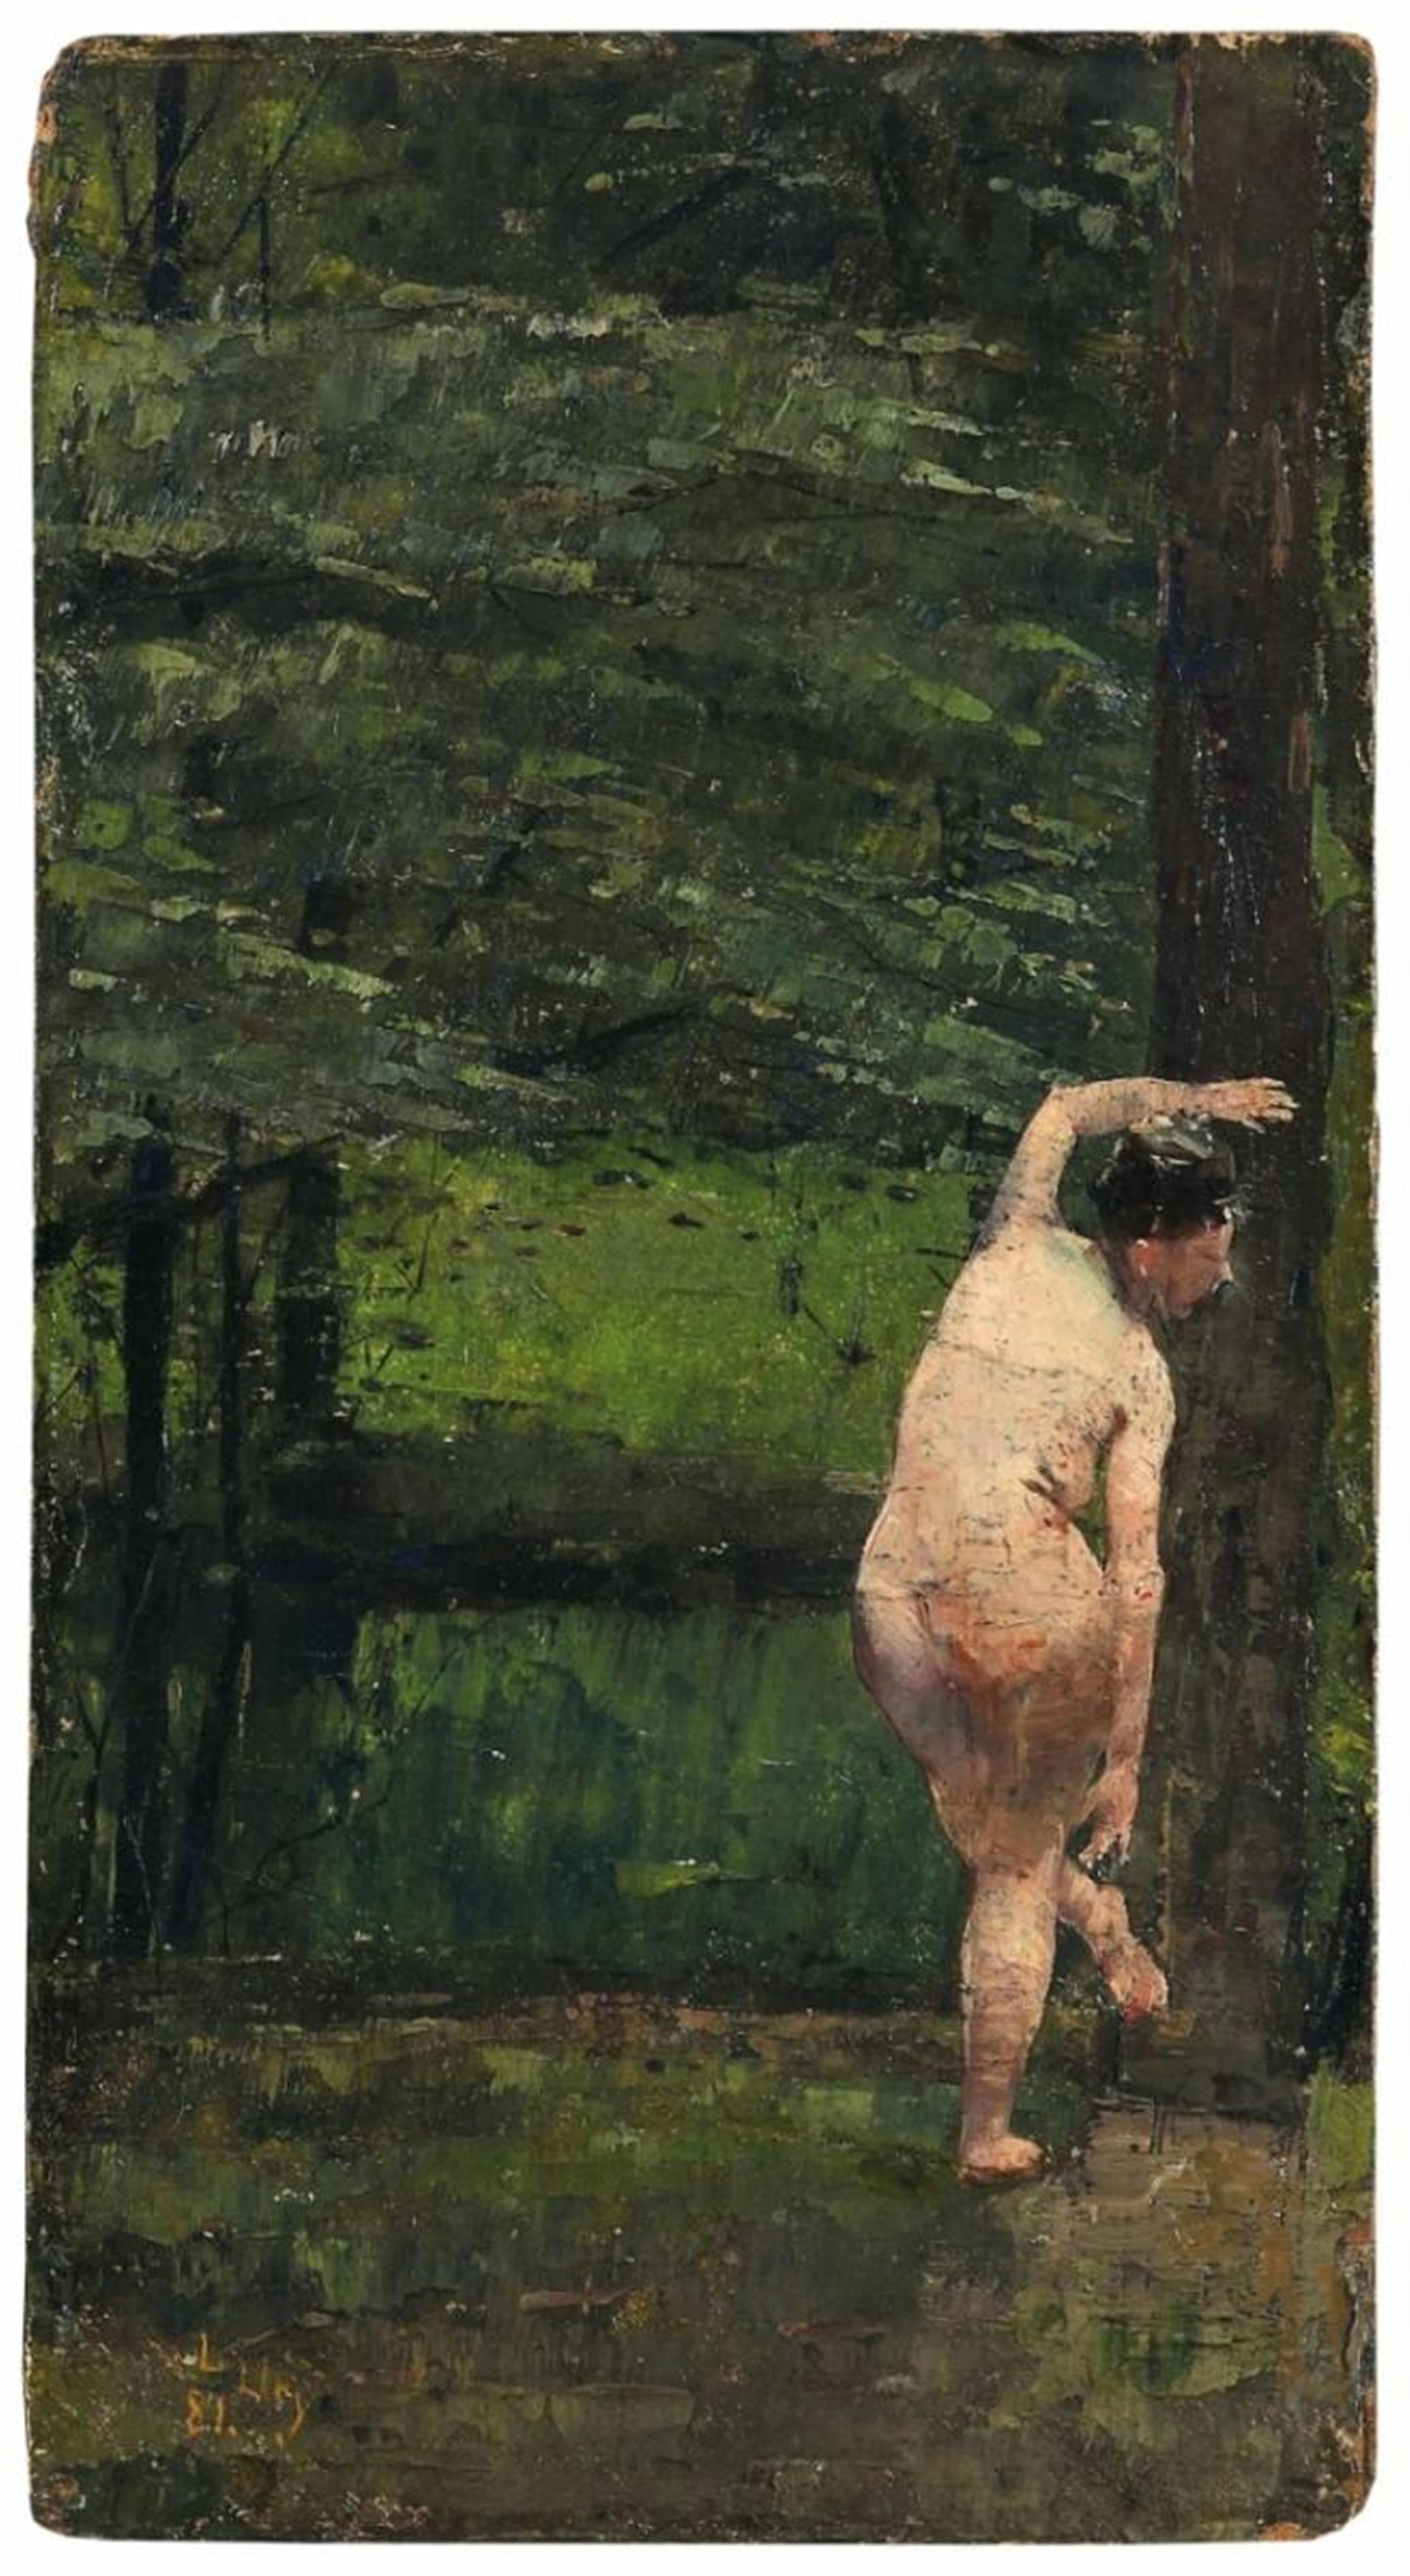 Lesser Ury - Badende im Wald: Rückenakt (Woman bathing in the forest: Nude from behind) - image-1